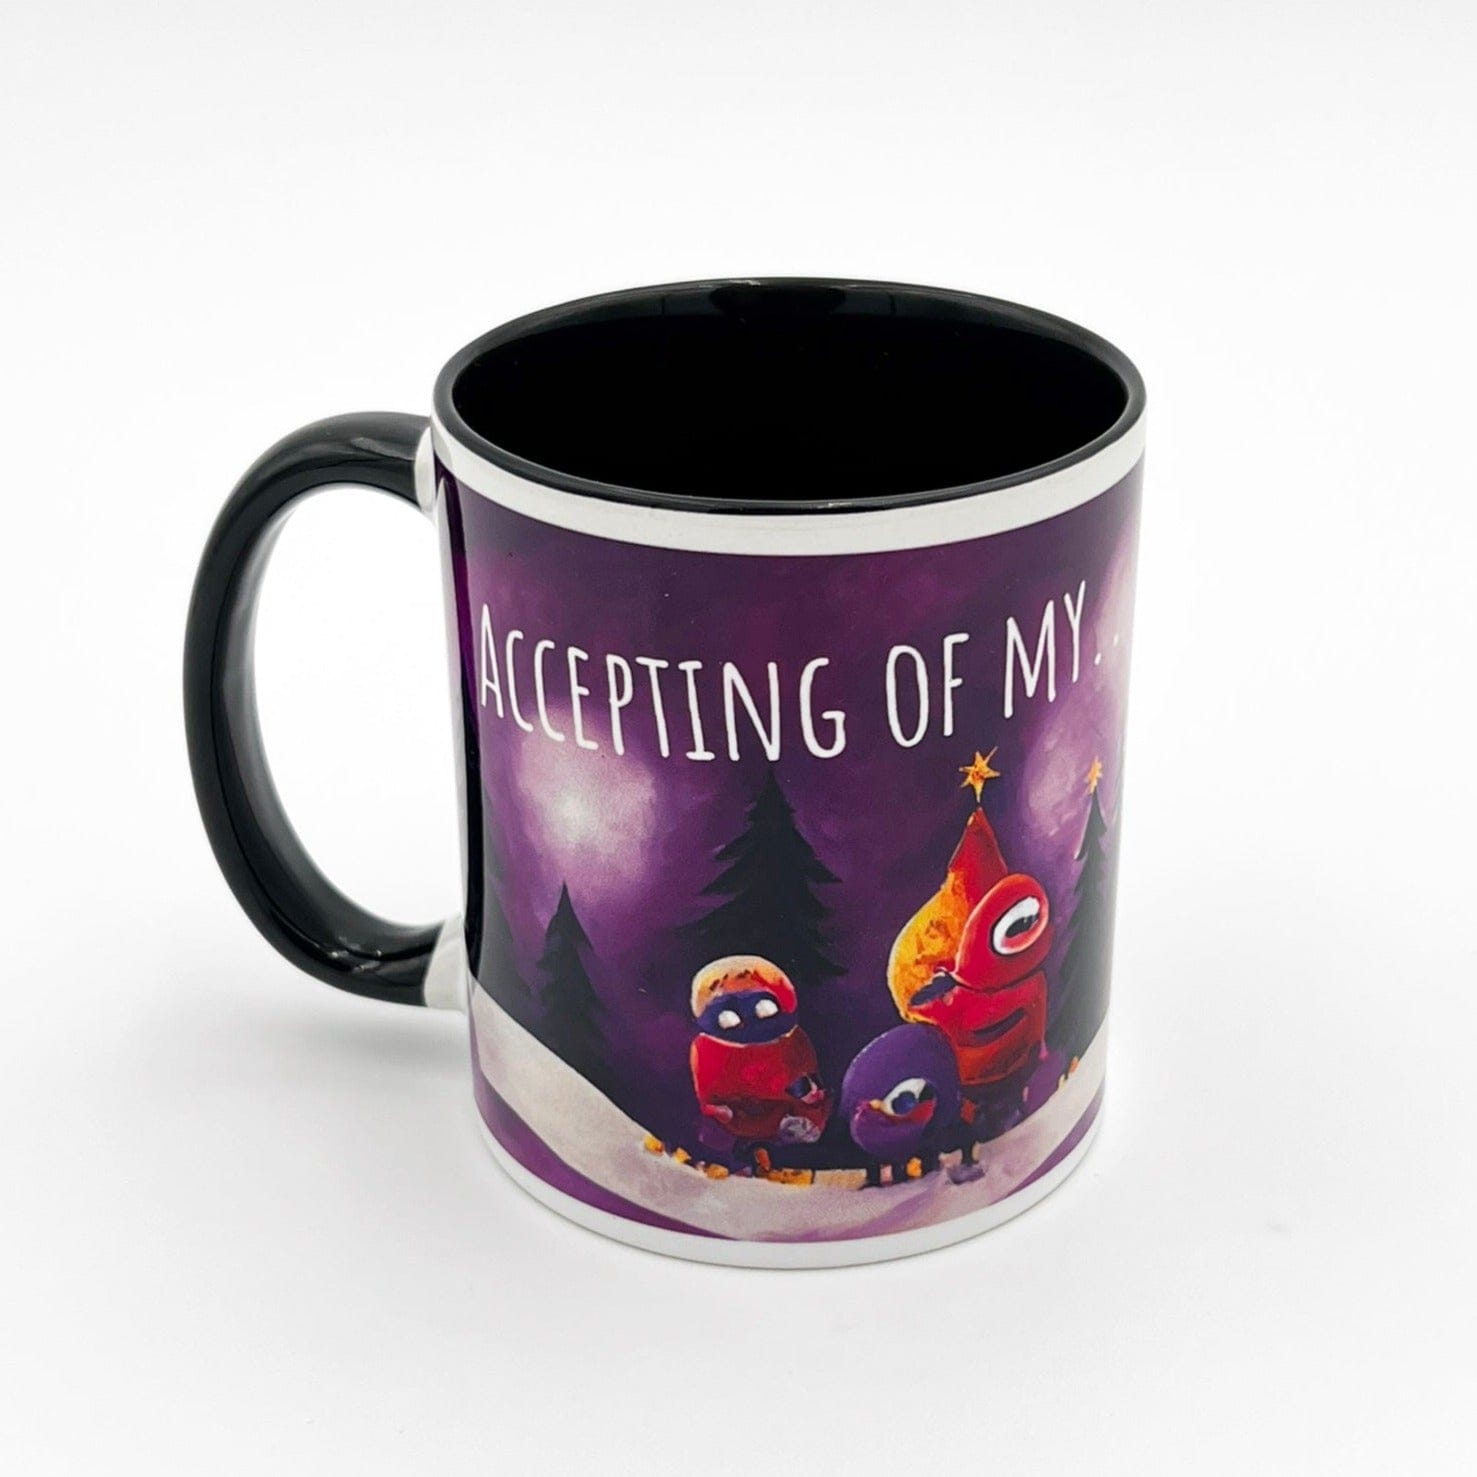 Accepting of my Guilt - Mug with Quirky Christmas Creatures